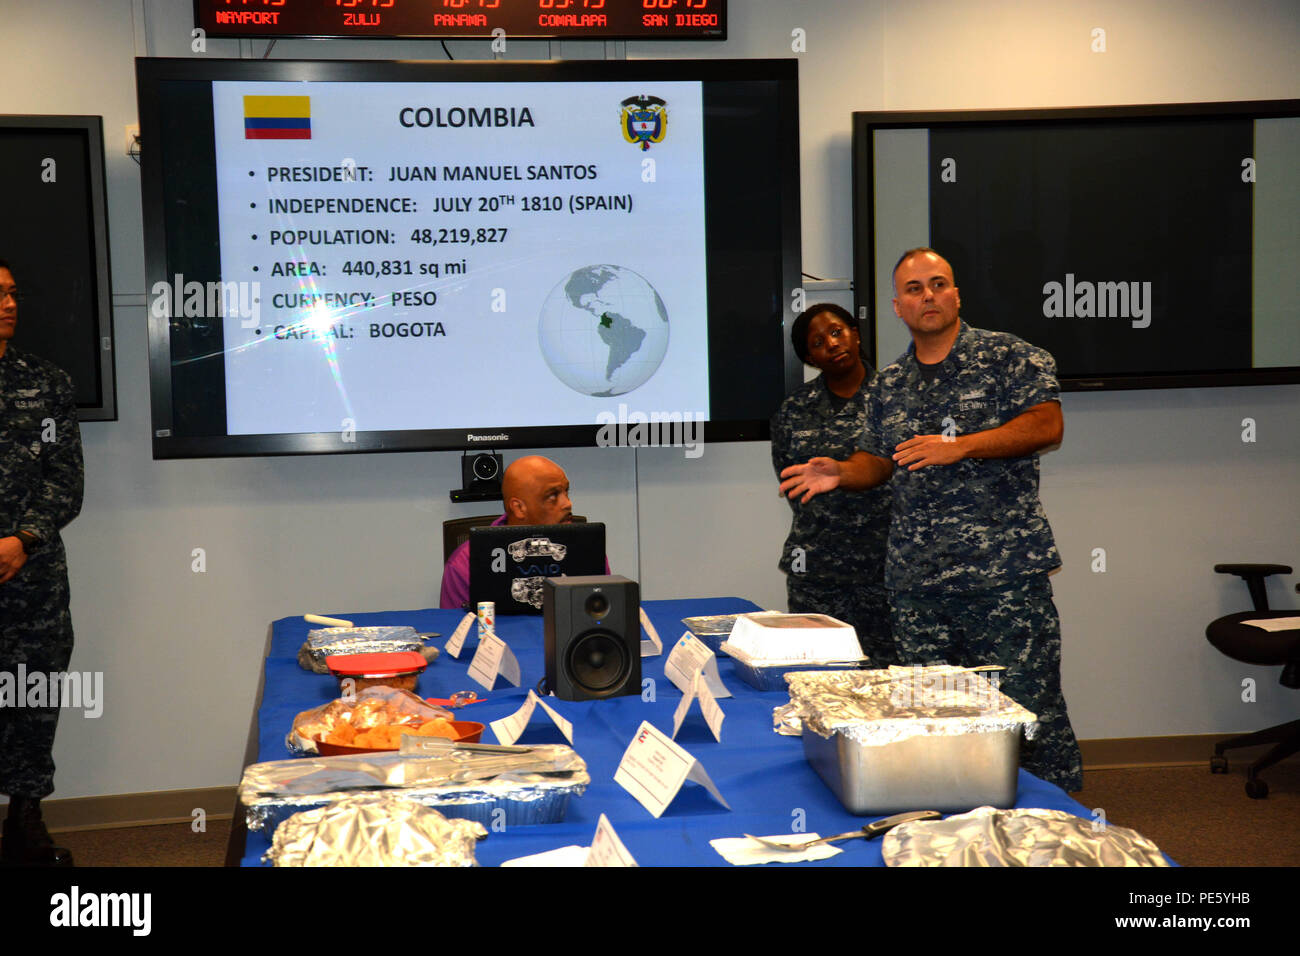 MAYPORT, Fla. (Oct 2, 2015)  FC1 Emanual Pachecho gives a speech about the history of Hispanic Heritage Month in America at U.S. Naval Forces Southern Command/ U.S. 4th Fleet's pot-luck celebration in honor of Hispanic Heritage Month. U.S. Naval Forces Southern Command/U.S. 4th Fleet is headquartered at Naval Station Mayport. Stock Photo